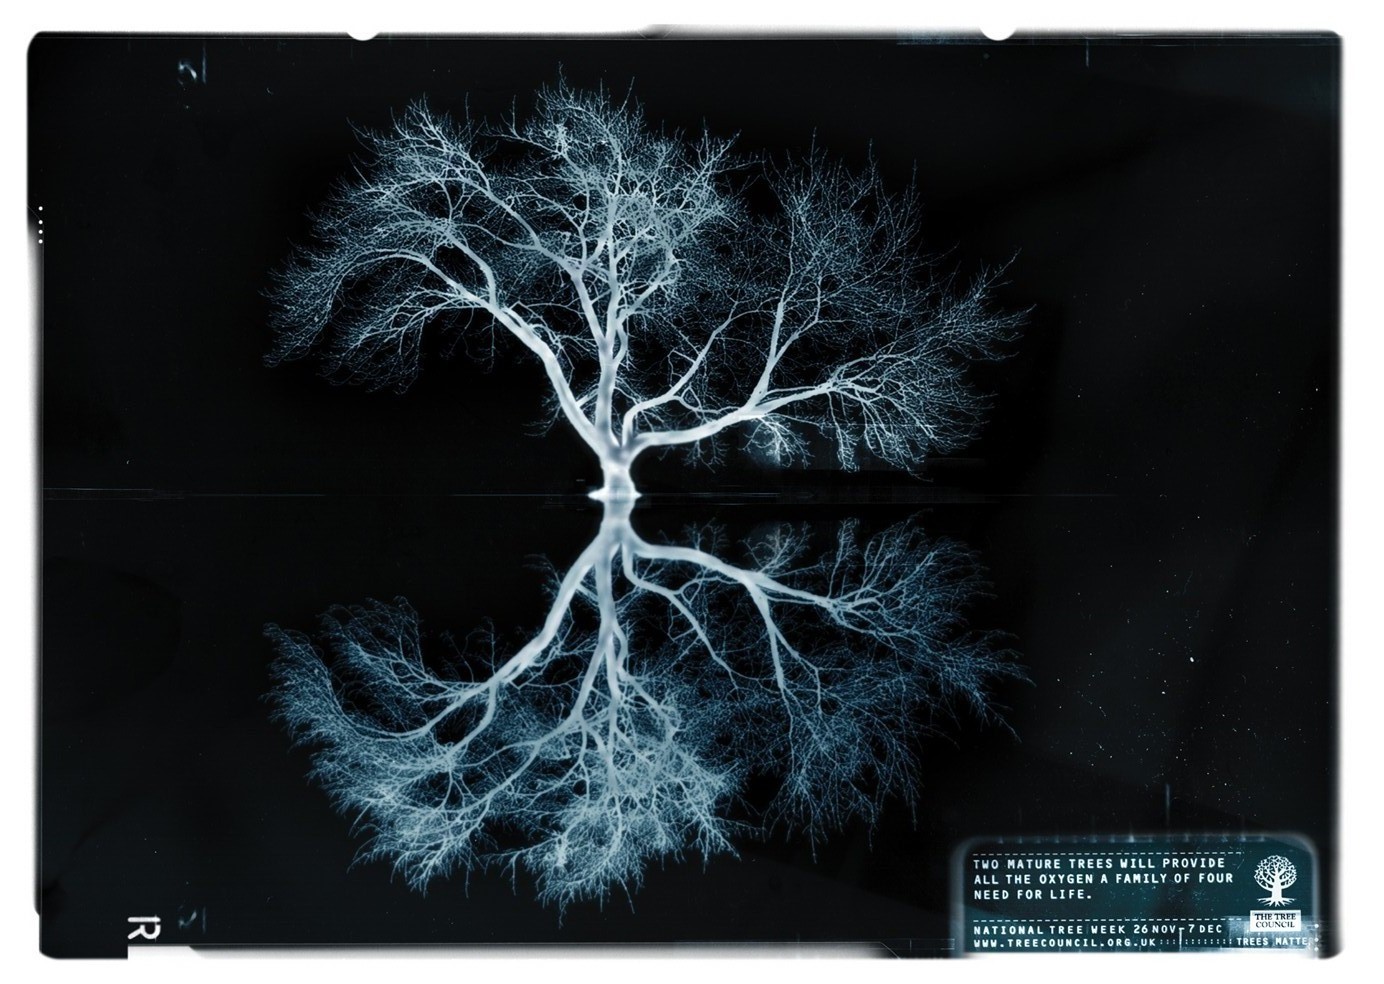 X-ray photograph of a tree and it's reflection to give the impression of a pair of lungs